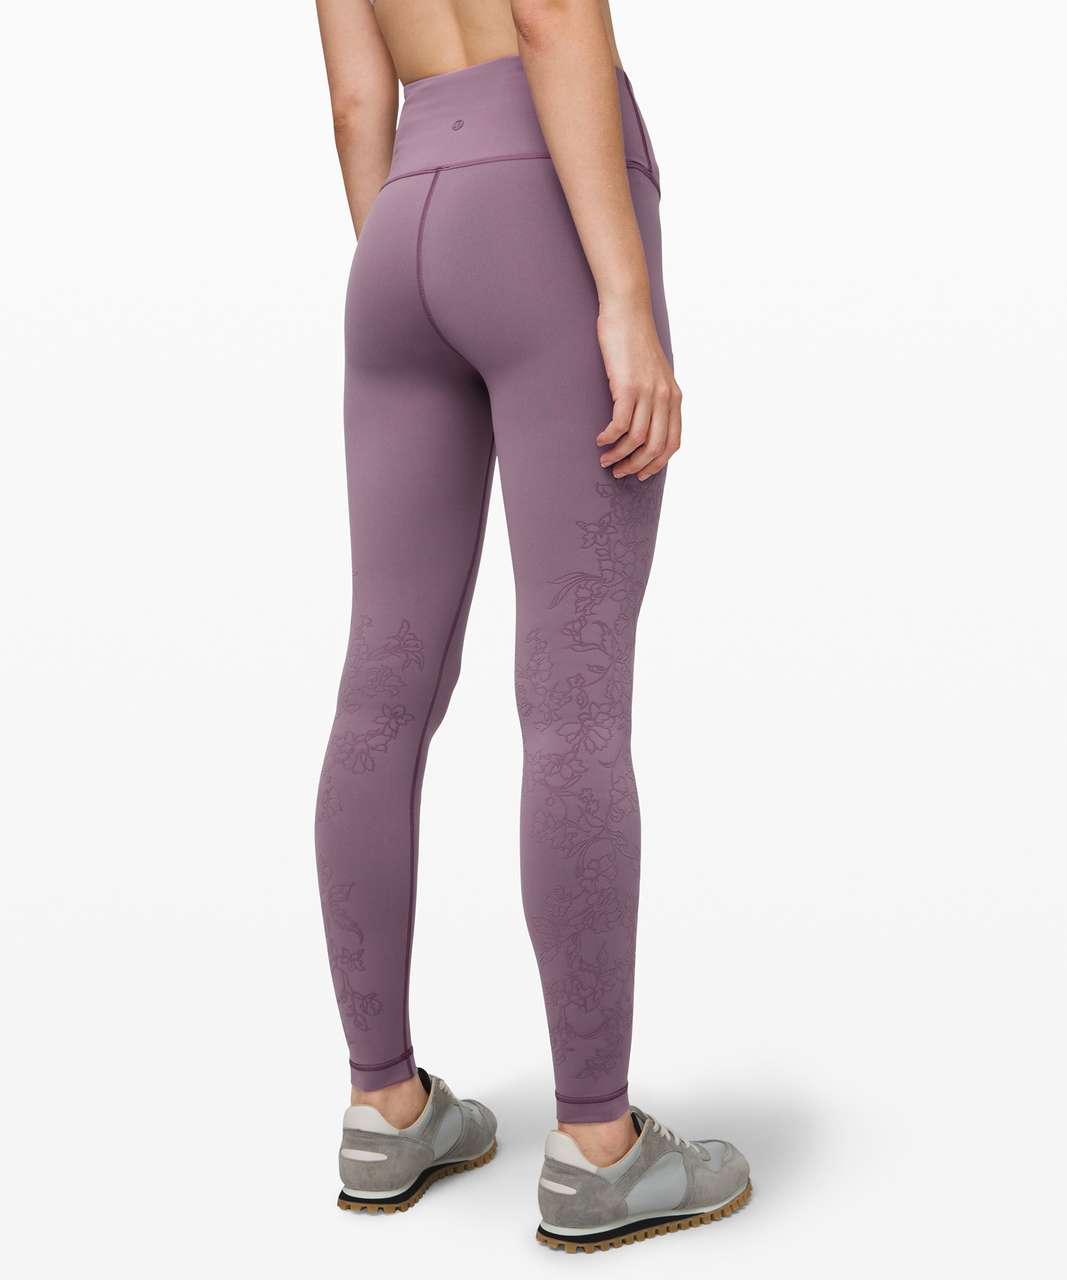 Lululemon Always On High-Rise Tight 28"*Flocked Everlux - Frosted Mulberry